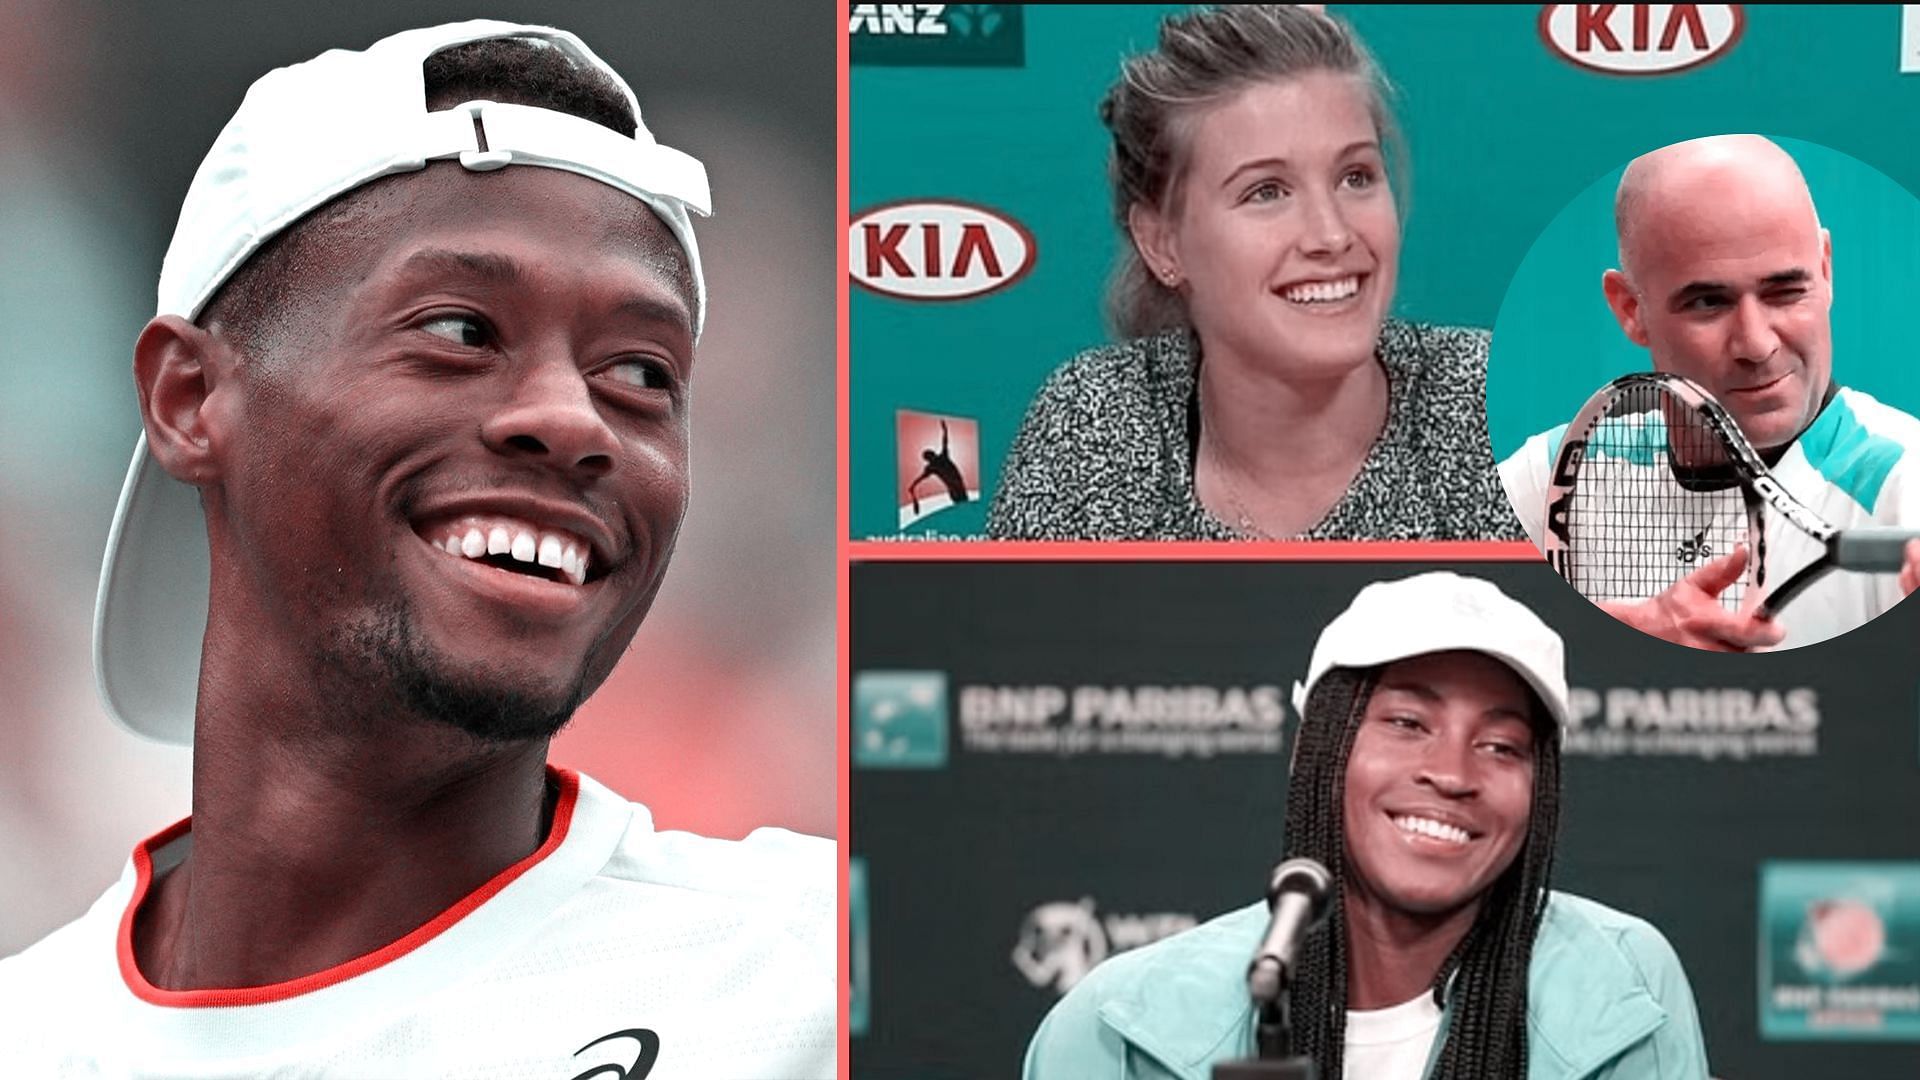 Coco Gauff and Eugenie Bouchard reacted to Christopher Eubanks breaking Andre Agassi